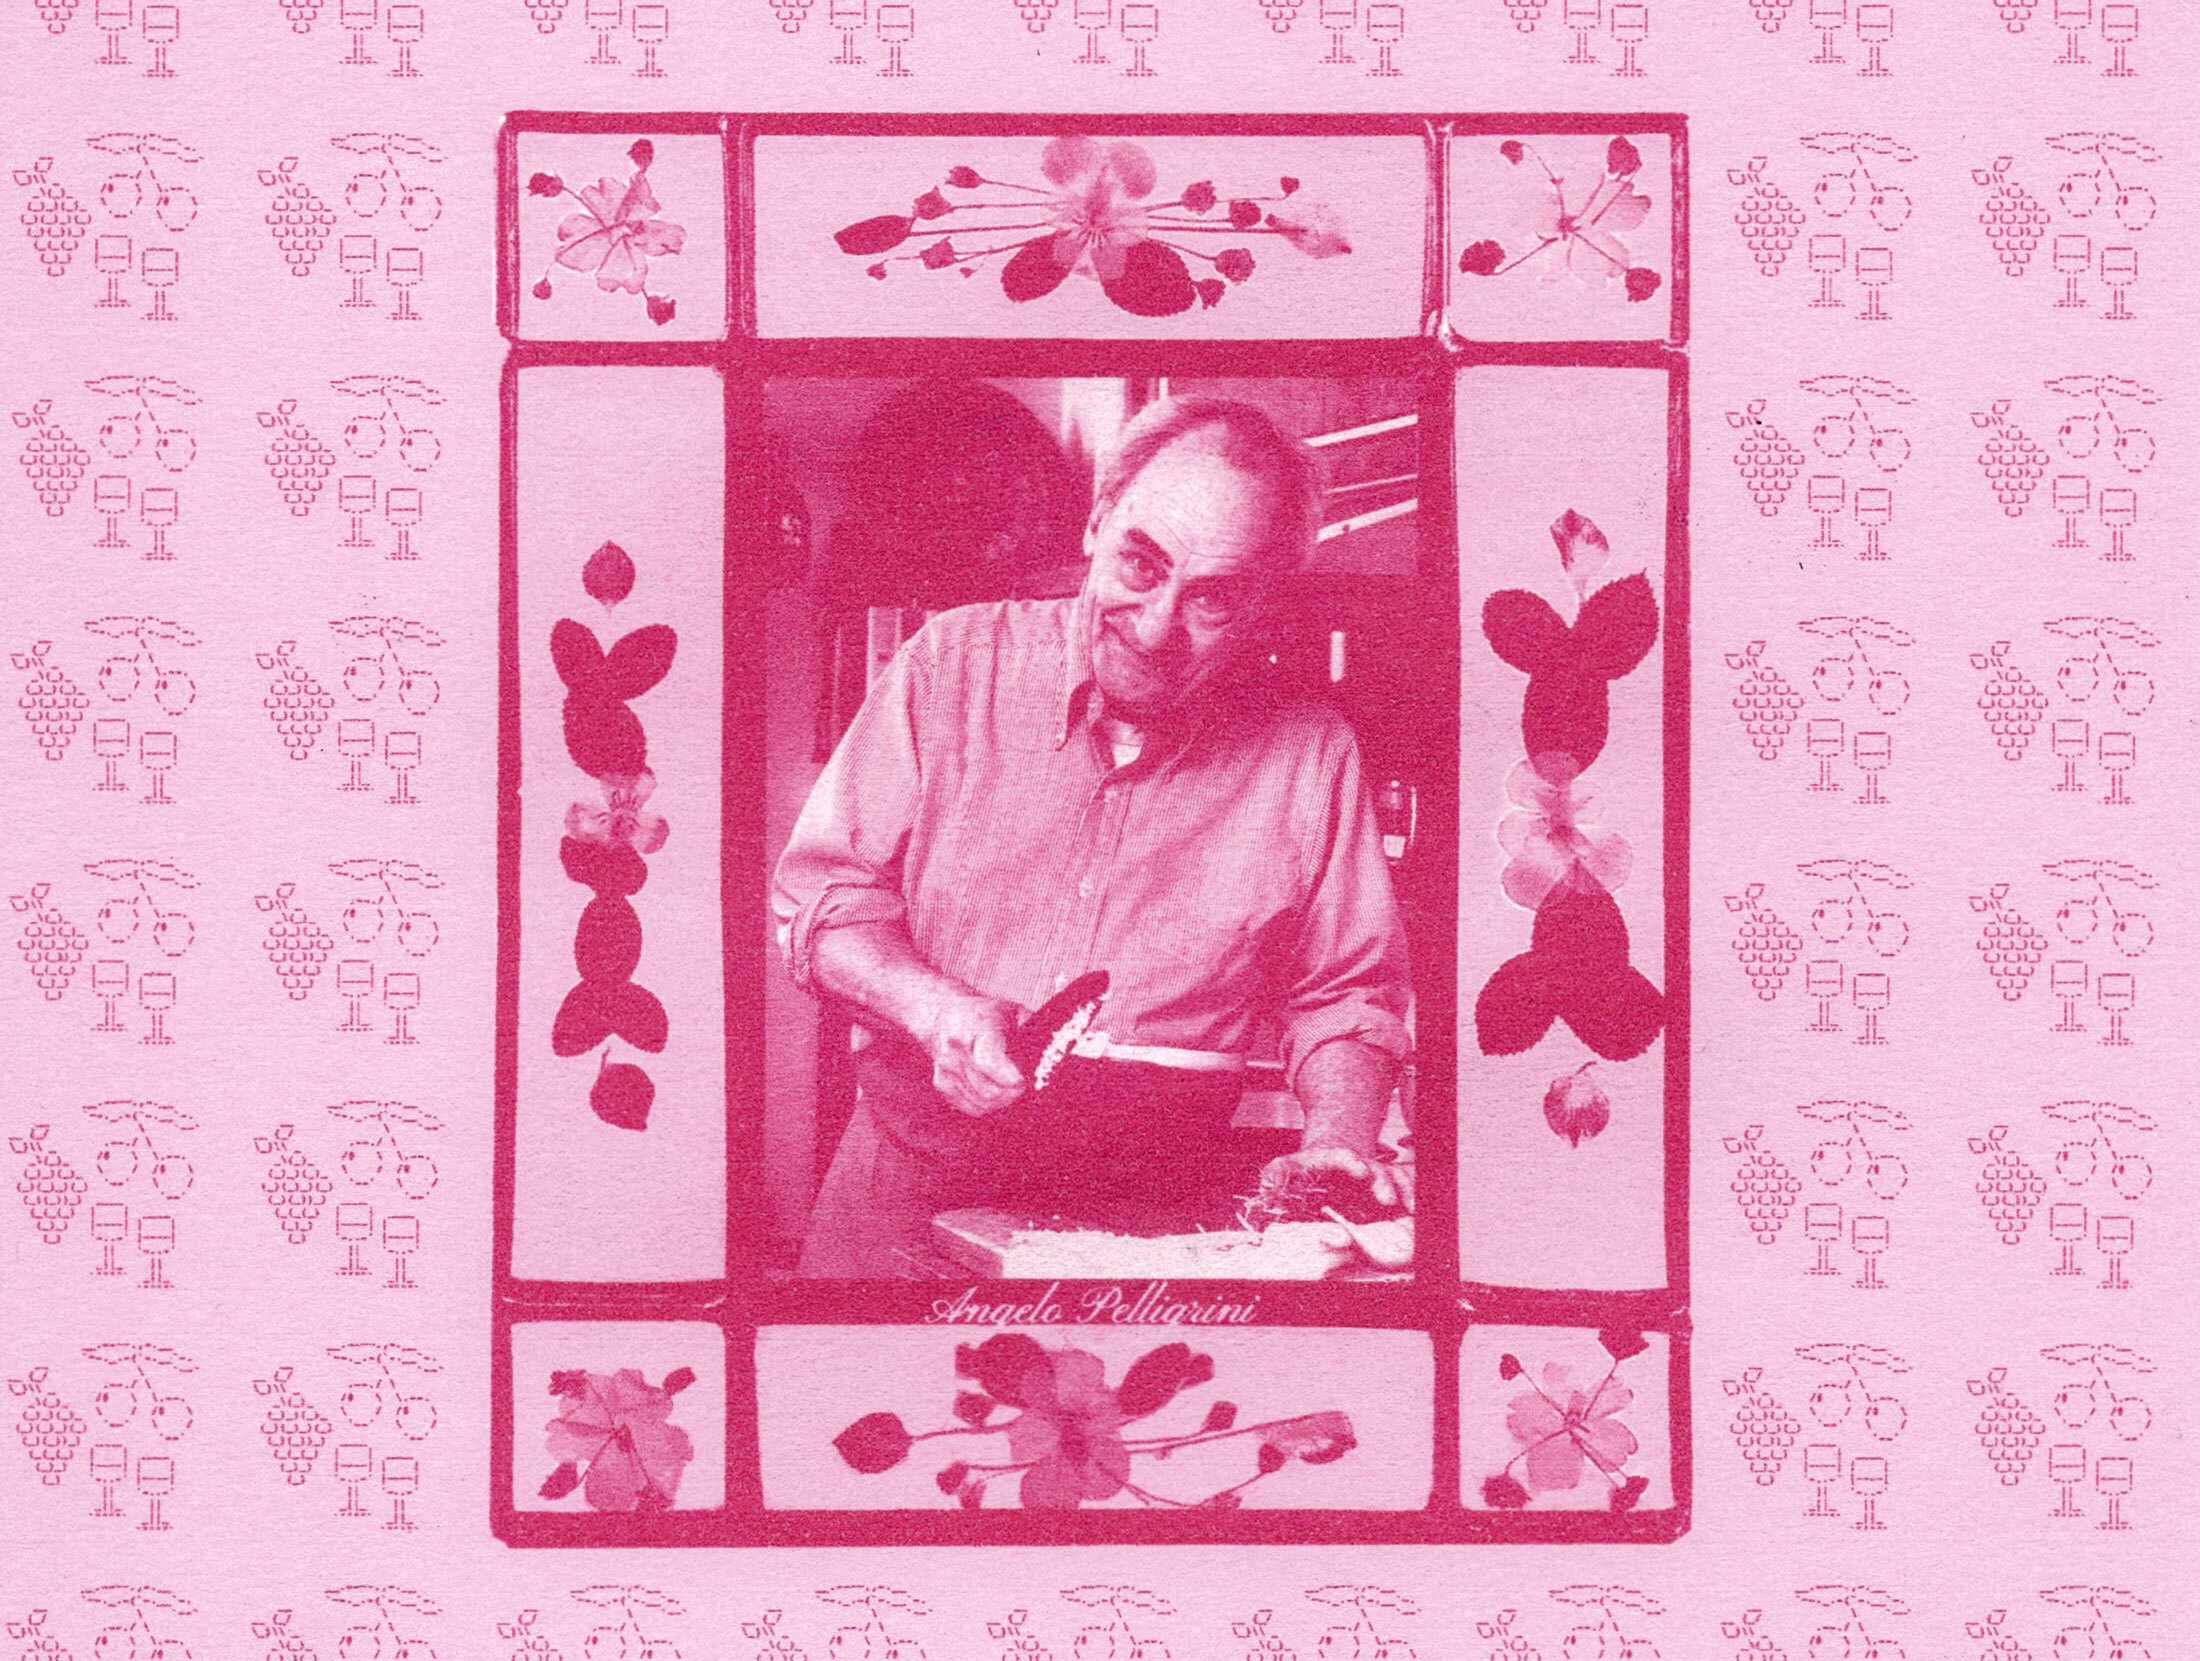 A pink duo-tone image of a man holding a knife above a cutting board. His photo is framed by collaged pressed and dried flowers. The frame is set on a pink background with outlines of grapes and cherries.